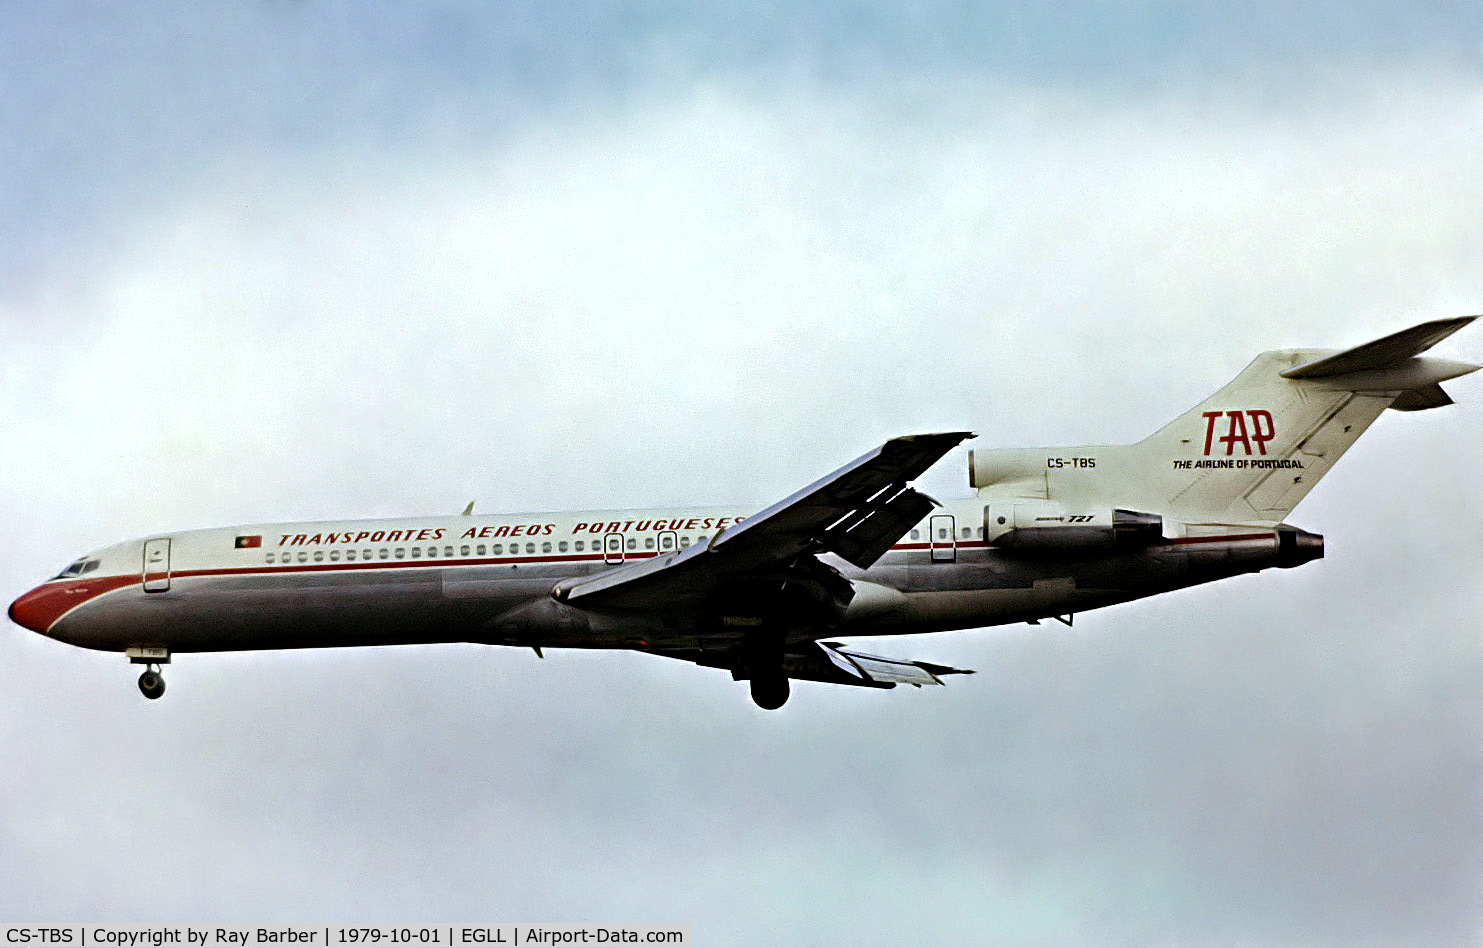 CS-TBS, 1974 Boeing 727-282 C/N 20973, Boeing 727-282 [20973] (TAP-Transportes Aereos Portugueses)  01/10/1979. From a slide. On finals 28L.